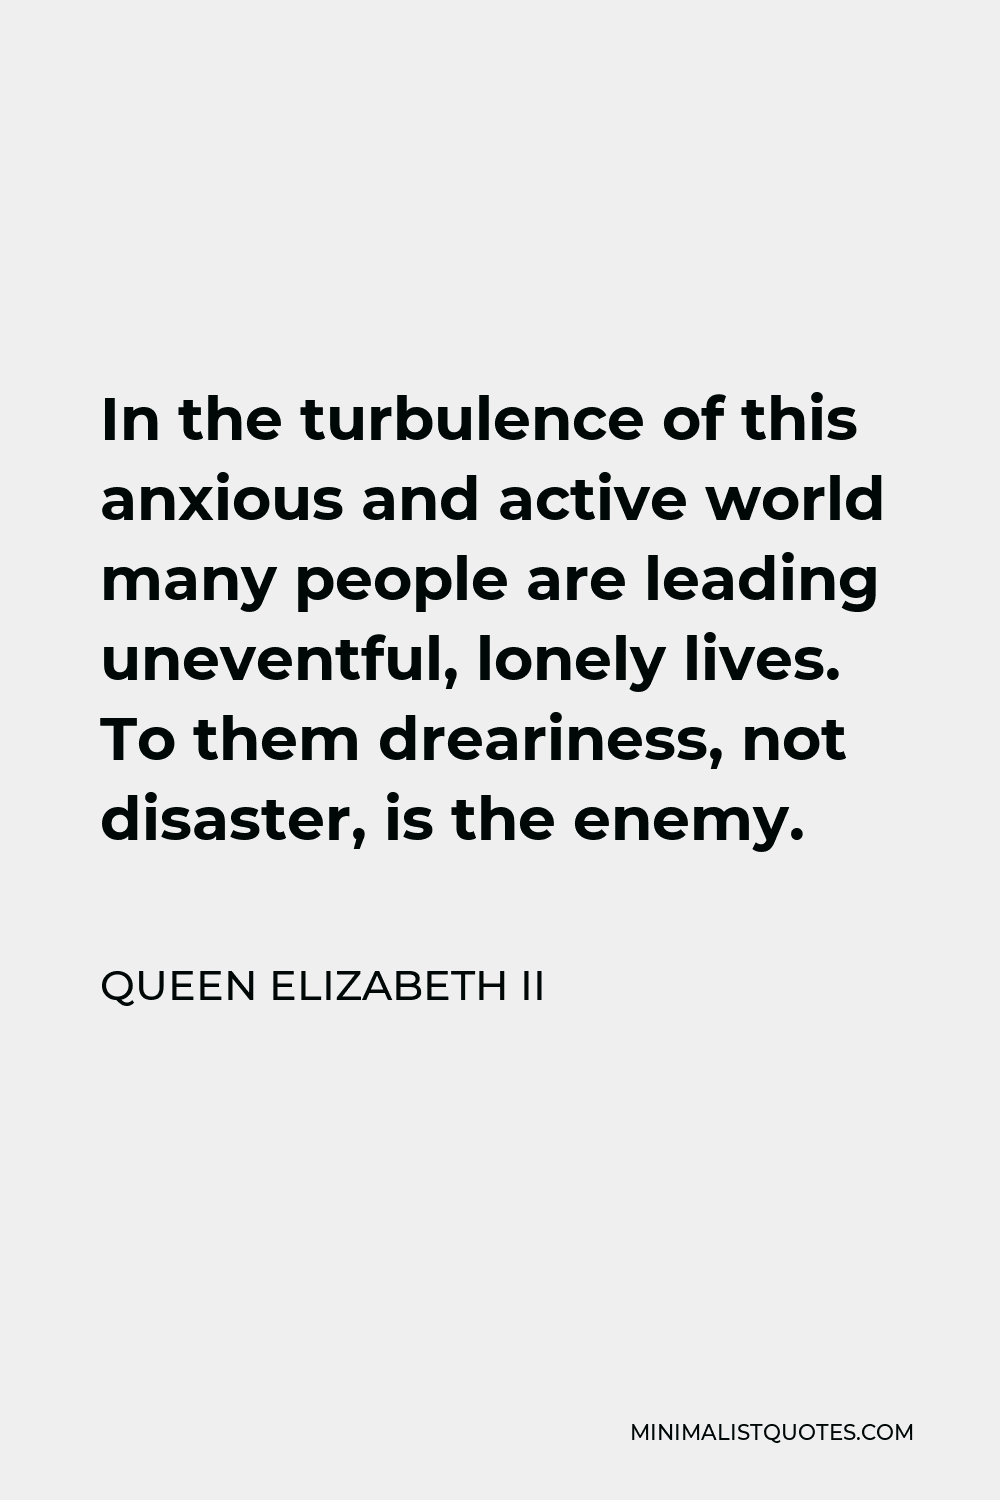 Queen Elizabeth II Quote - In the turbulence of this anxious and active world many people are leading uneventful, lonely lives. To them dreariness, not disaster, is the enemy.